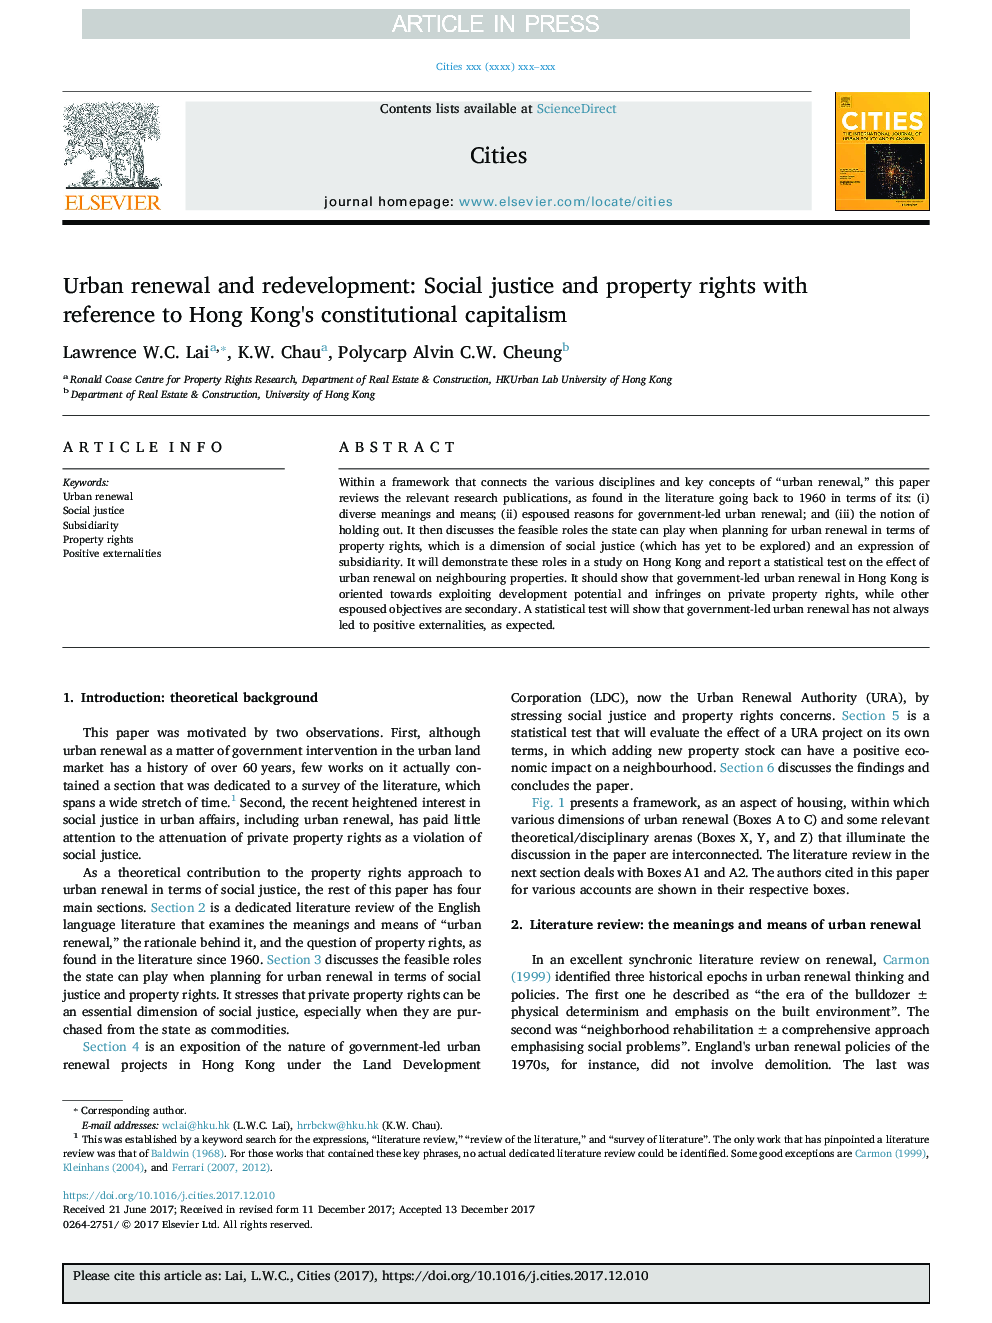 Urban renewal and redevelopment: Social justice and property rights with reference to Hong Kong's constitutional capitalism